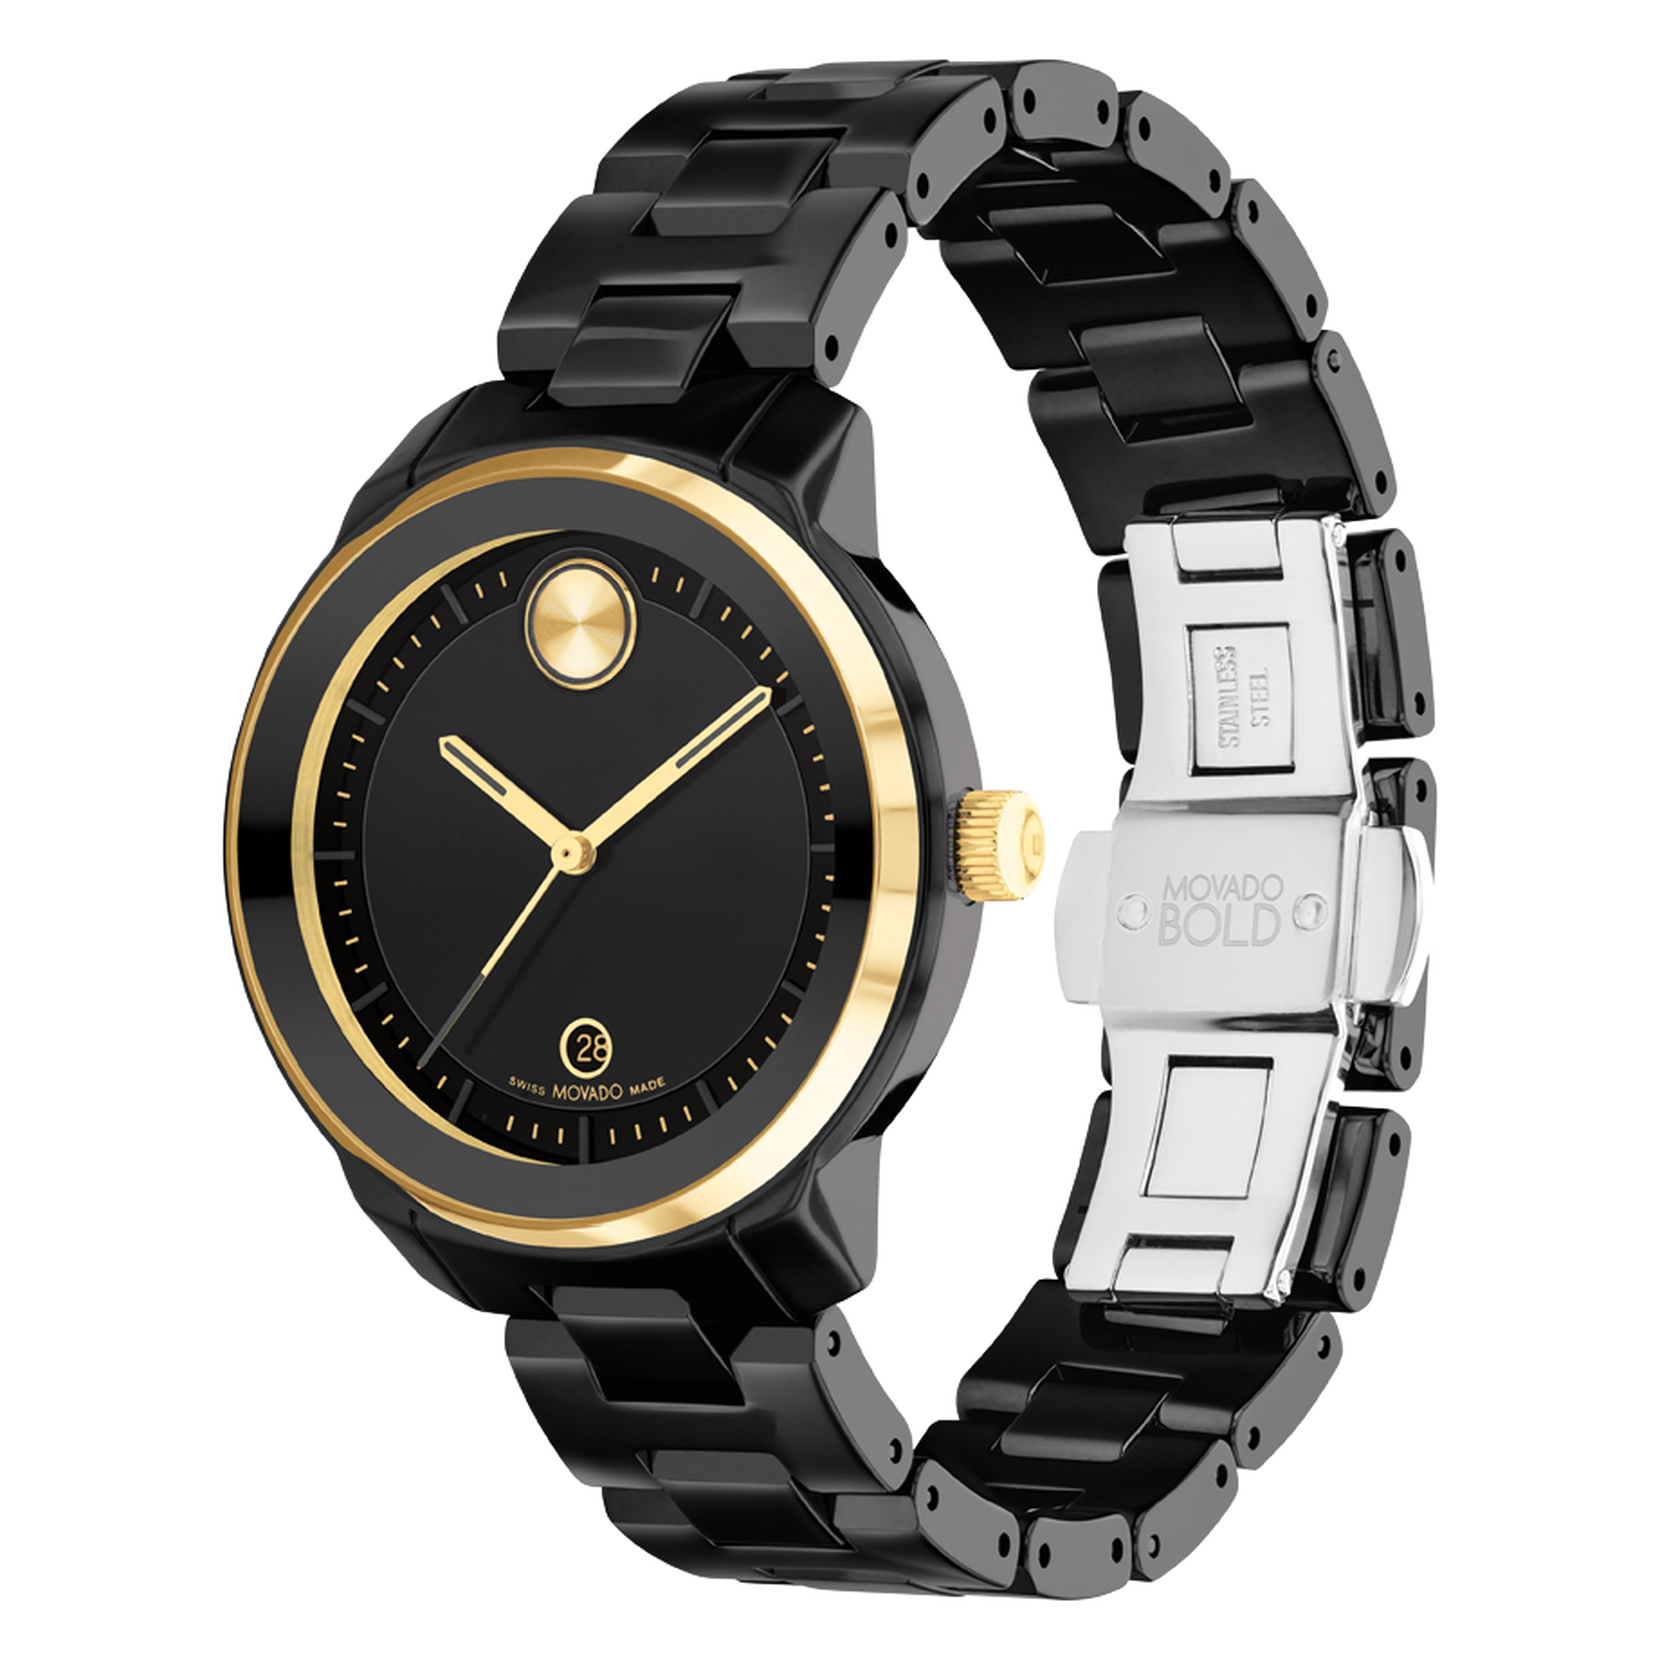 Bold Verso Date Black Dial